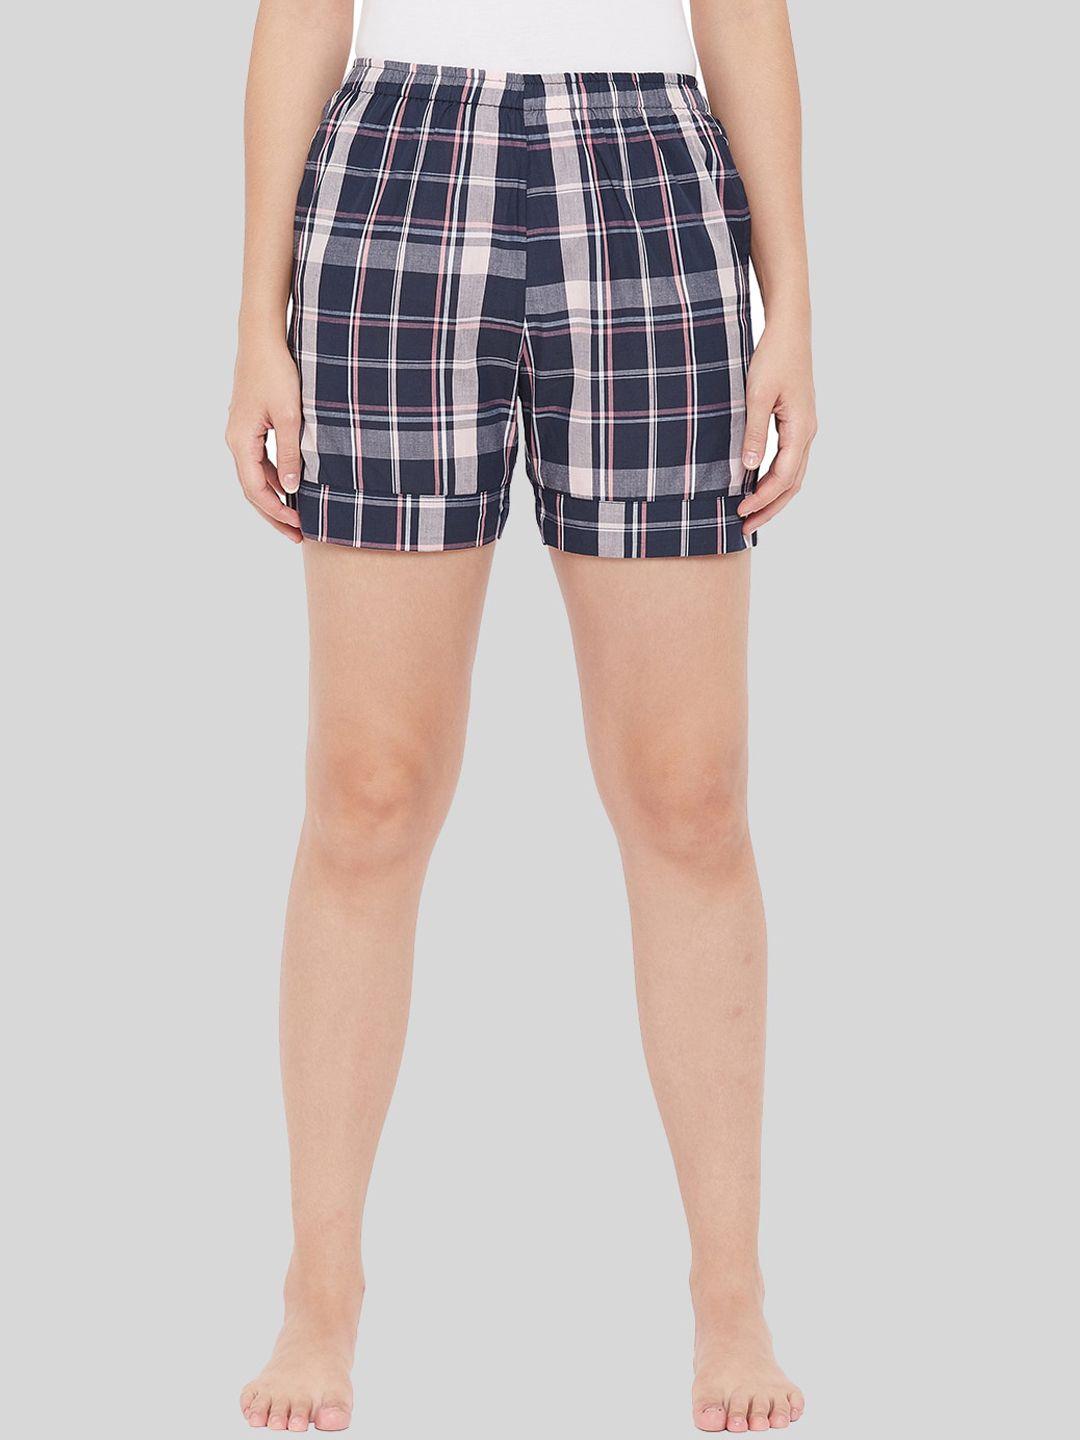 style shoes women black checked shorts